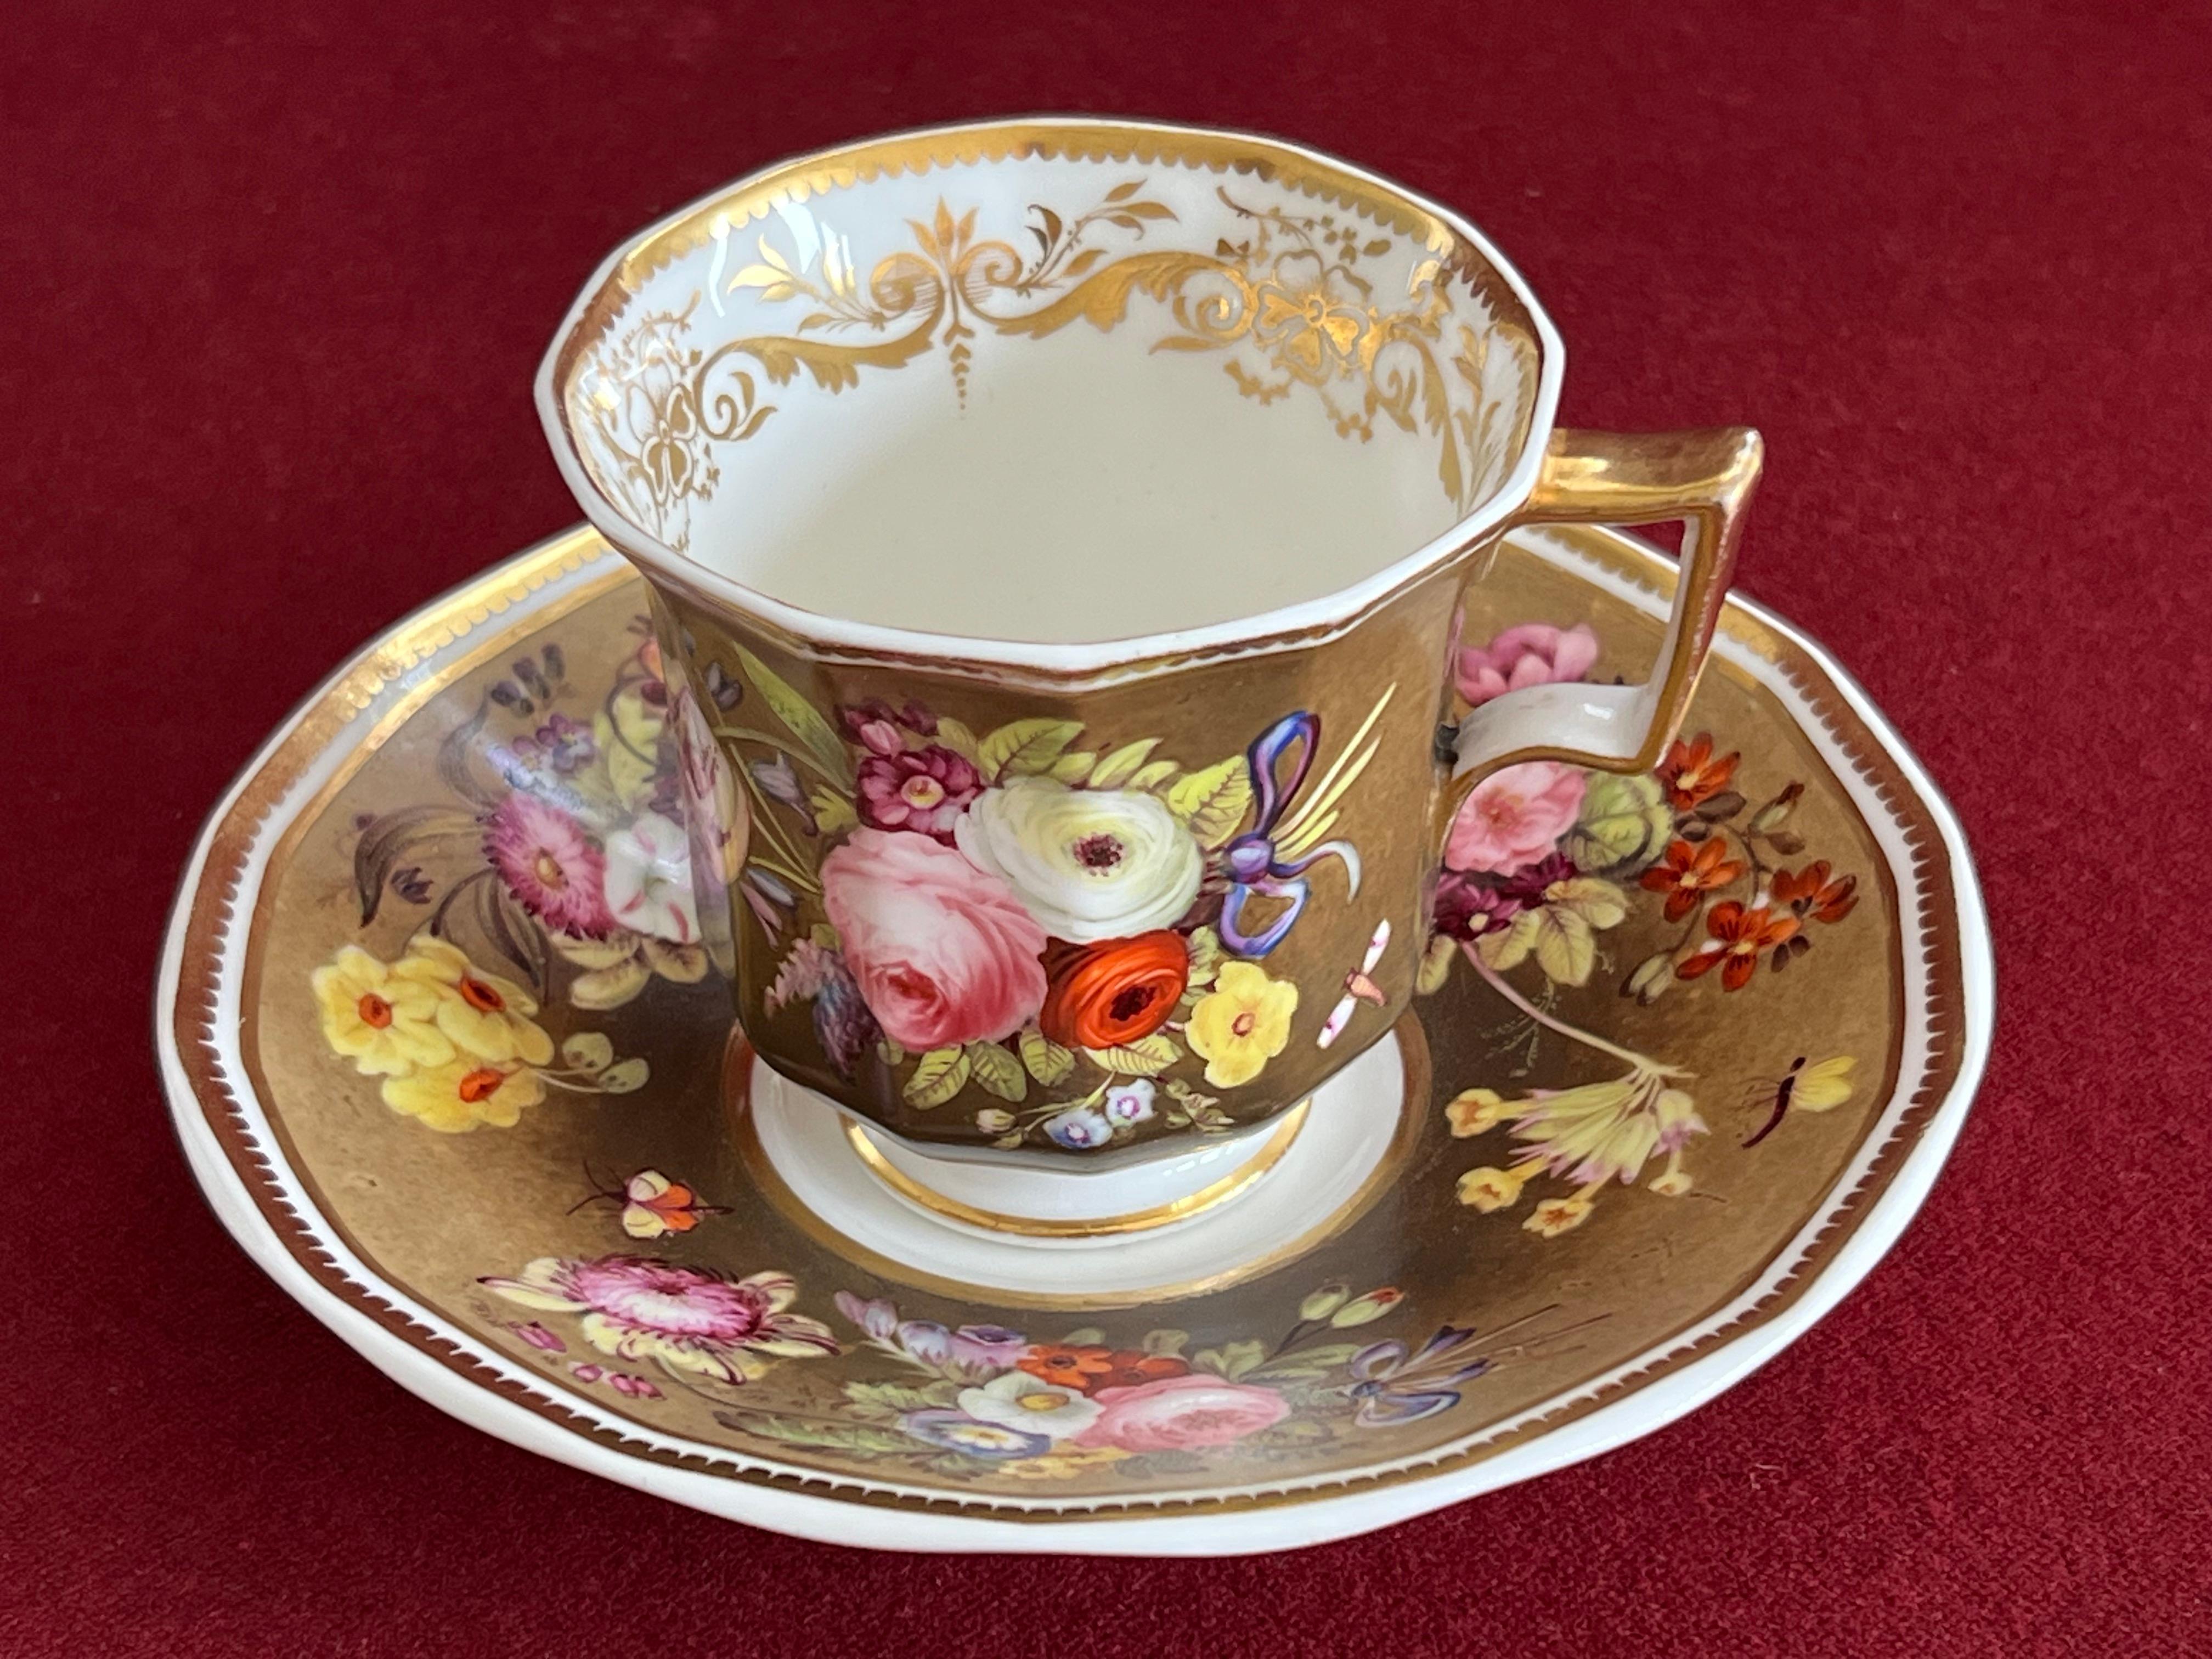 A fine Spode porcelain coffee cup and saucer c.1830. Although the cup has twelve sides, it is still called 'Octagon' shape, which was introduced by Spode 1829.

Very finely decorated with floral bouquets with blue-purple-white ribbon bows, and